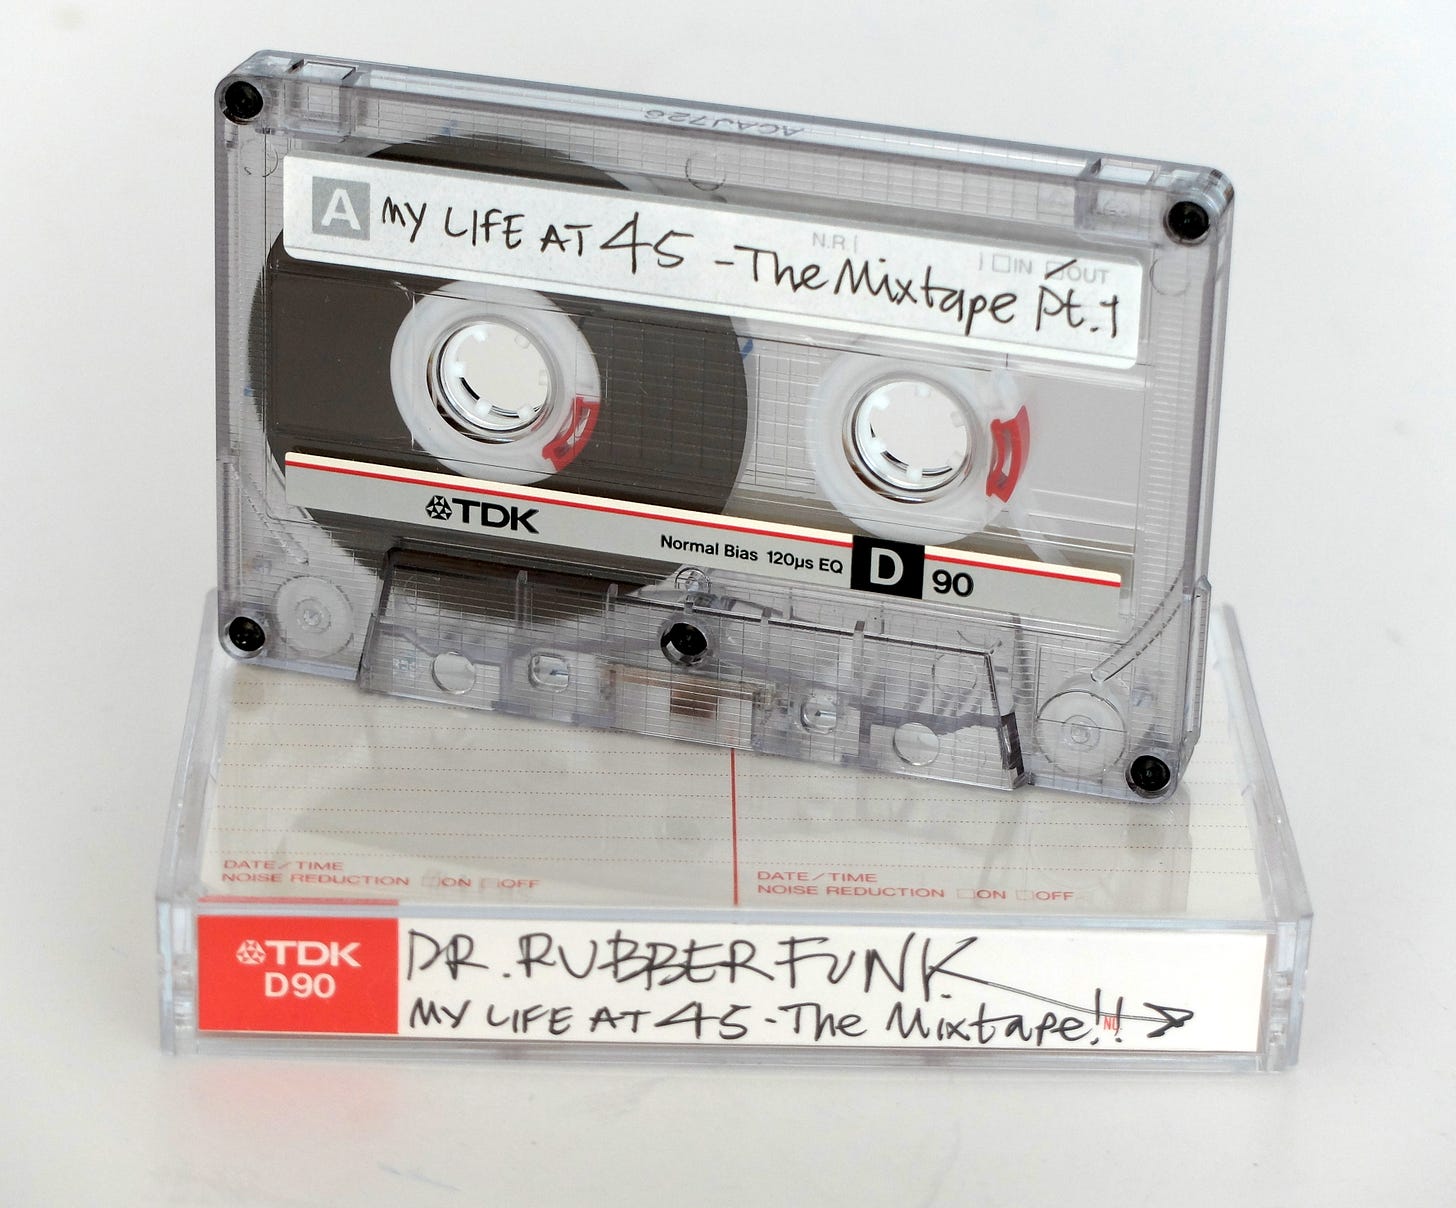 Photo of Dr Rubberfunk Mixtape recorded onto Made In Japan mid 80’s TDK D90.